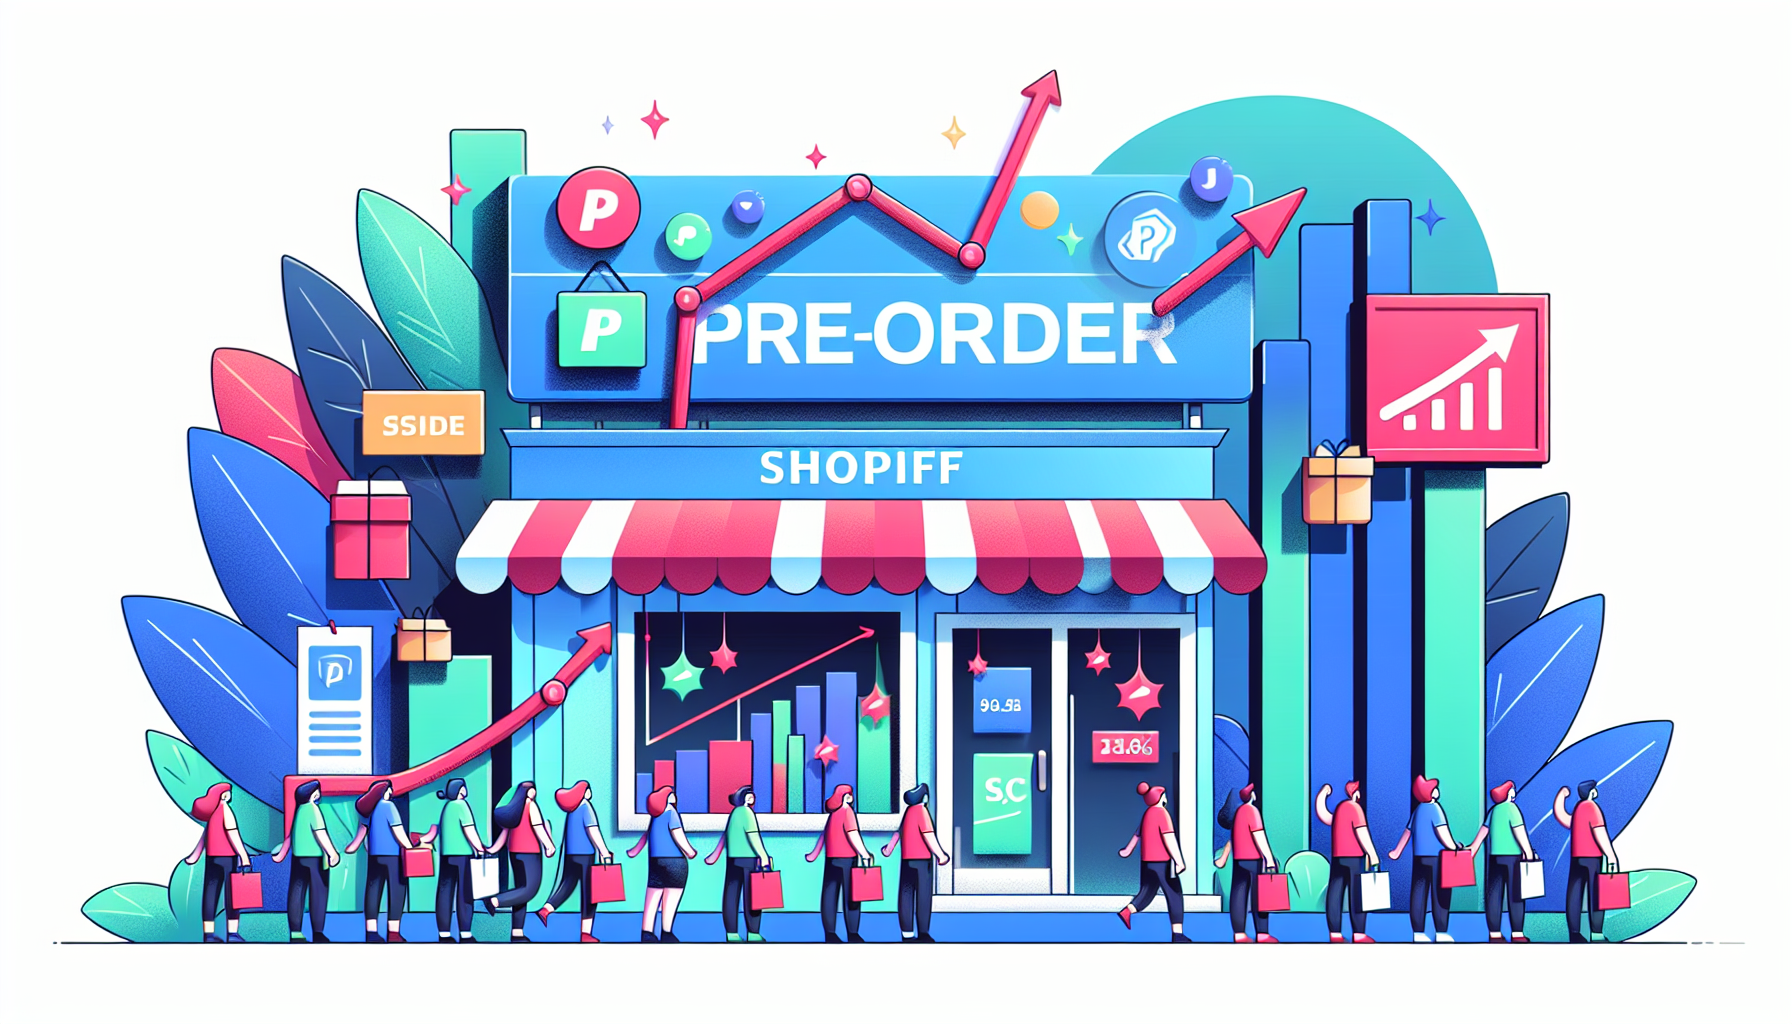 Illustration of a Shopify store with increased sales